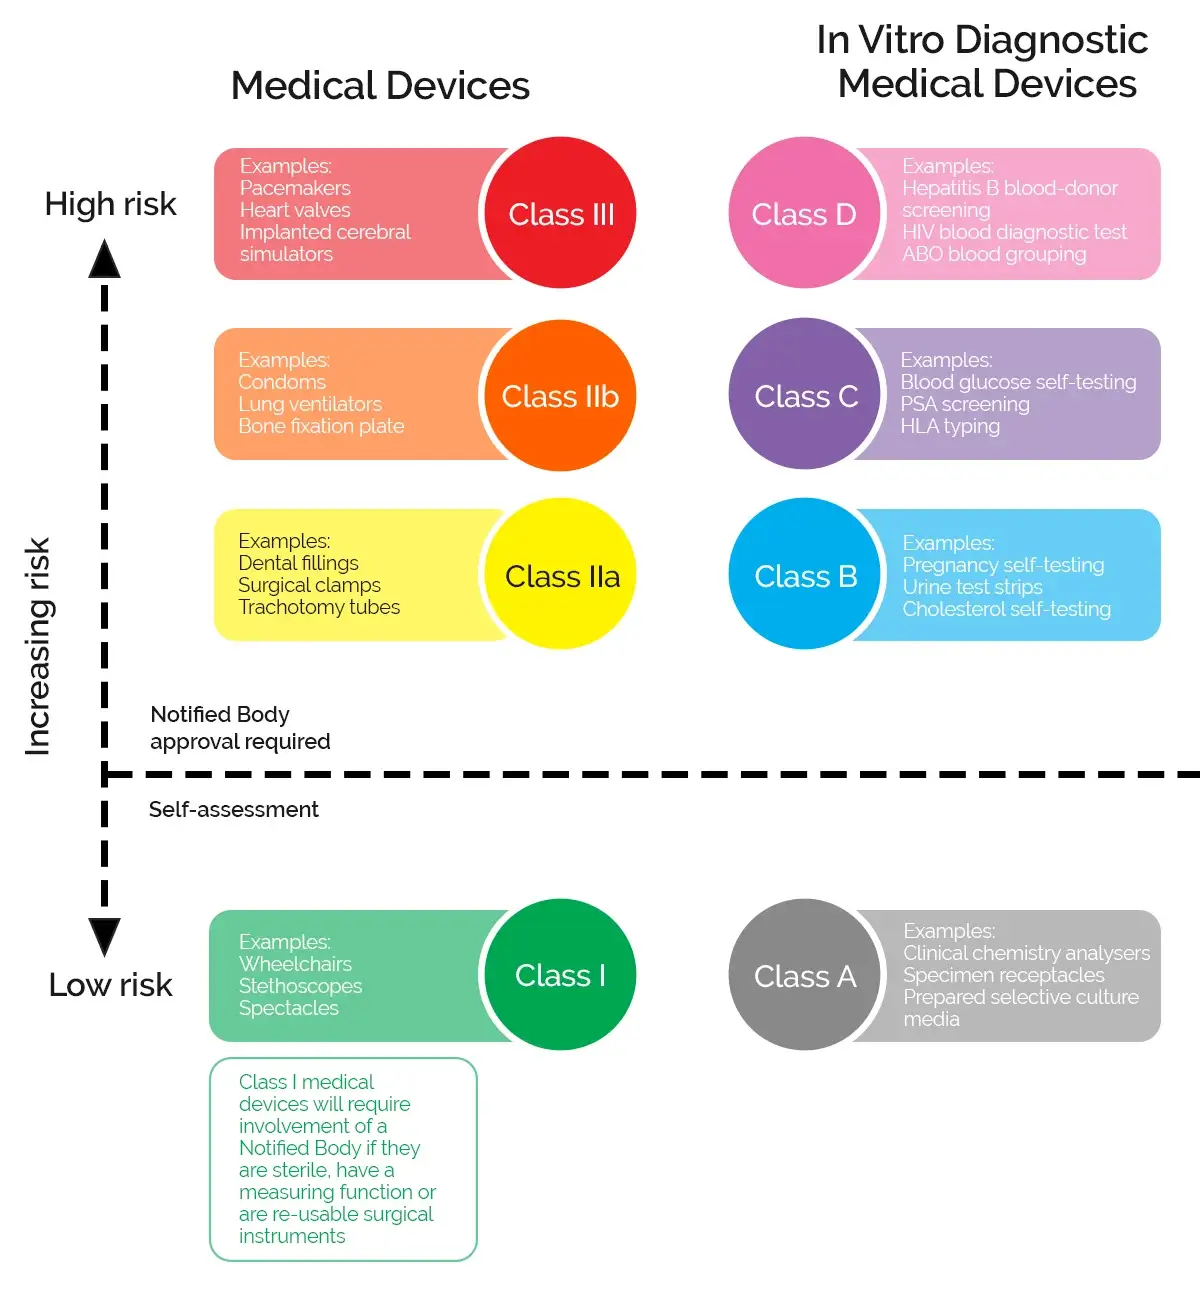 mhra-medical device (1) (1)-1